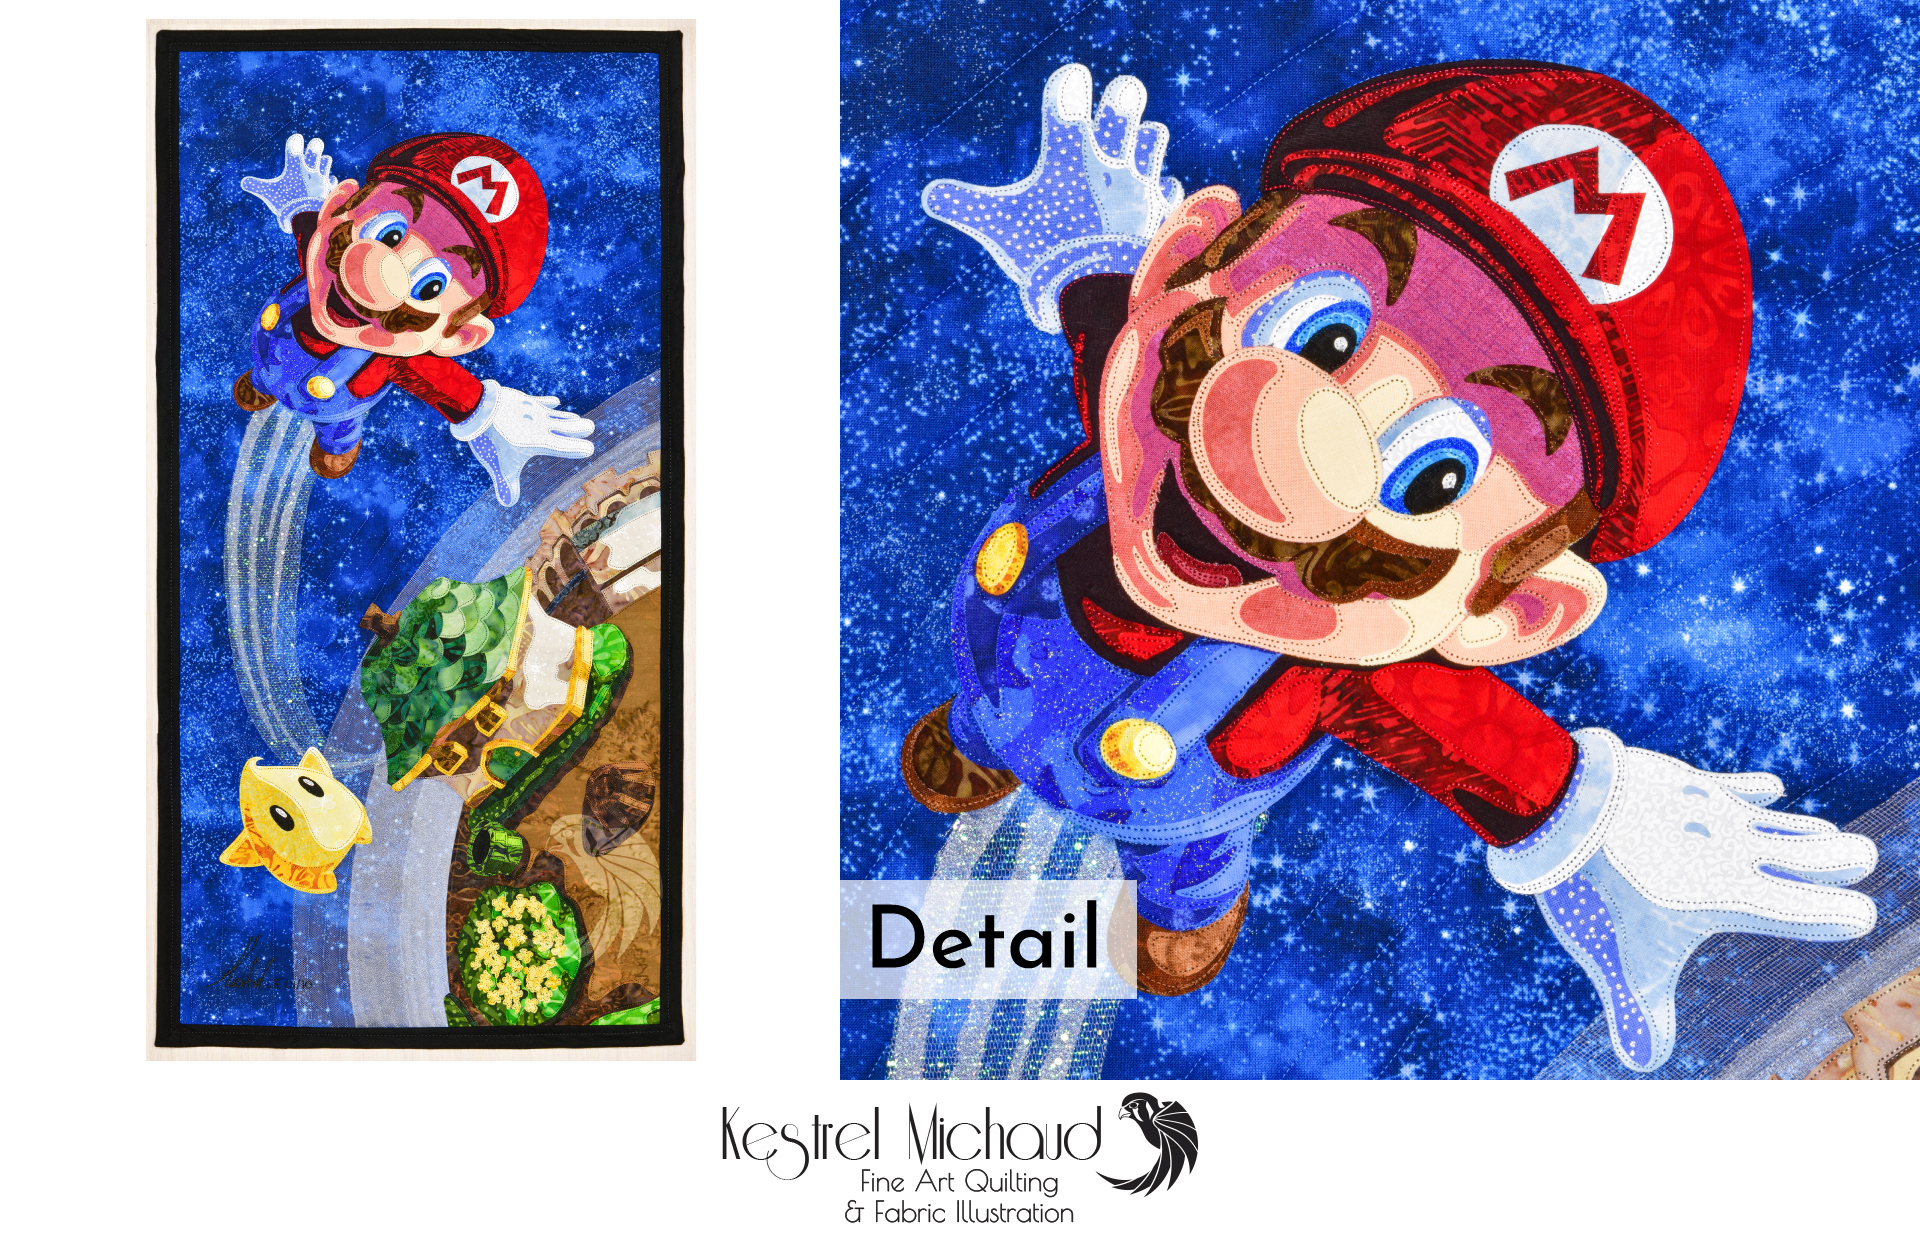 Super Mario Galaxy Quilt and detail